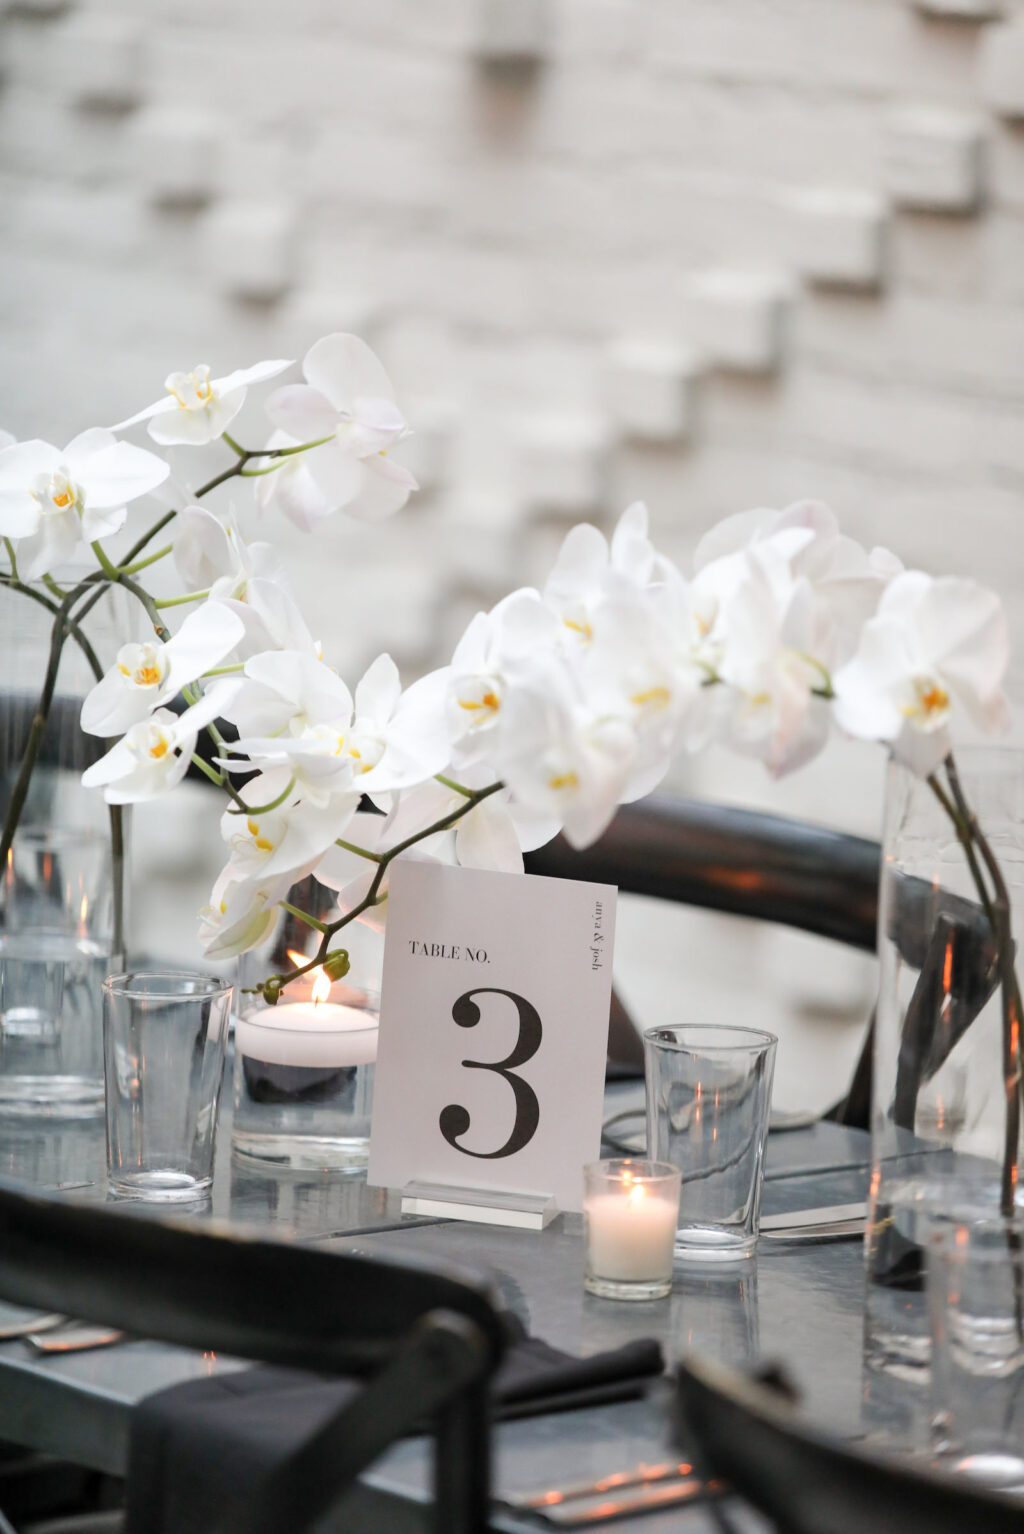 Modern Timeless Black and White Wedding Reception Decor, Black Tables and Chairs, White Orchid Floral Arrangement Centerpieces, Candlesticks in Hurricane Glass Vases | Tampa Wedding Venue Oxford Exchange | Wedding Photographer Lifelong Photography Studio